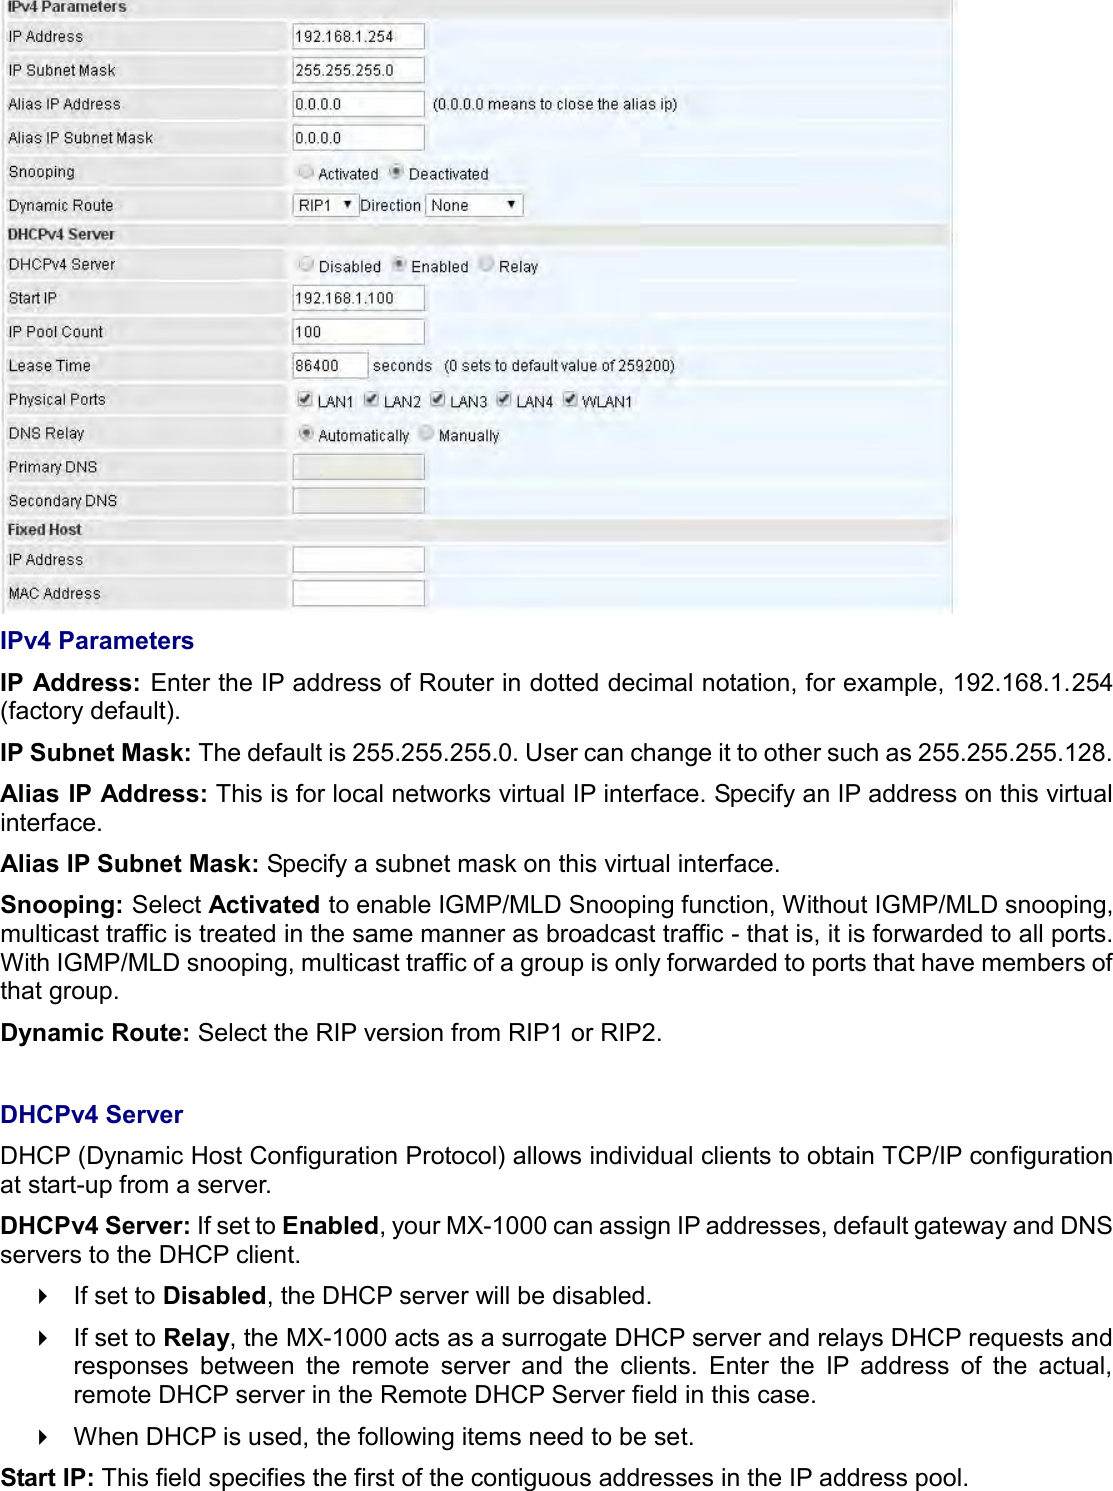     IPv4 Parameters IP Address: Enter the IP address of Router in dotted decimal notation, for example, 192.168.1.254 (factory default). IP Subnet Mask: The default is 255.255.255.0. User can change it to other such as 255.255.255.128. Alias IP Address: This is for local networks virtual IP interface. Specify an IP address on this virtual interface. Alias IP Subnet Mask: Specify a subnet mask on this virtual interface. Snooping: Select Activated to enable IGMP/MLD Snooping function, Without IGMP/MLD snooping, multicast traffic is treated in the same manner as broadcast traffic - that is, it is forwarded to all ports. With IGMP/MLD snooping, multicast traffic of a group is only forwarded to ports that have members of that group. Dynamic Route: Select the RIP version from RIP1 or RIP2.  DHCPv4 Server DHCP (Dynamic Host Configuration Protocol) allows individual clients to obtain TCP/IP configuration at start-up from a server. DHCPv4 Server: If set to Enabled, your MX-1000 can assign IP addresses, default gateway and DNS servers to the DHCP client.   If set to Disabled, the DHCP server will be disabled.   If set to Relay, the MX-1000 acts as a surrogate DHCP server and relays DHCP requests and responses  between  the  remote  server  and  the  clients.  Enter  the  IP  address  of  the  actual, remote DHCP server in the Remote DHCP Server field in this case.   When DHCP is used, the following items need to be set. Start IP: This field specifies the first of the contiguous addresses in the IP address pool. 